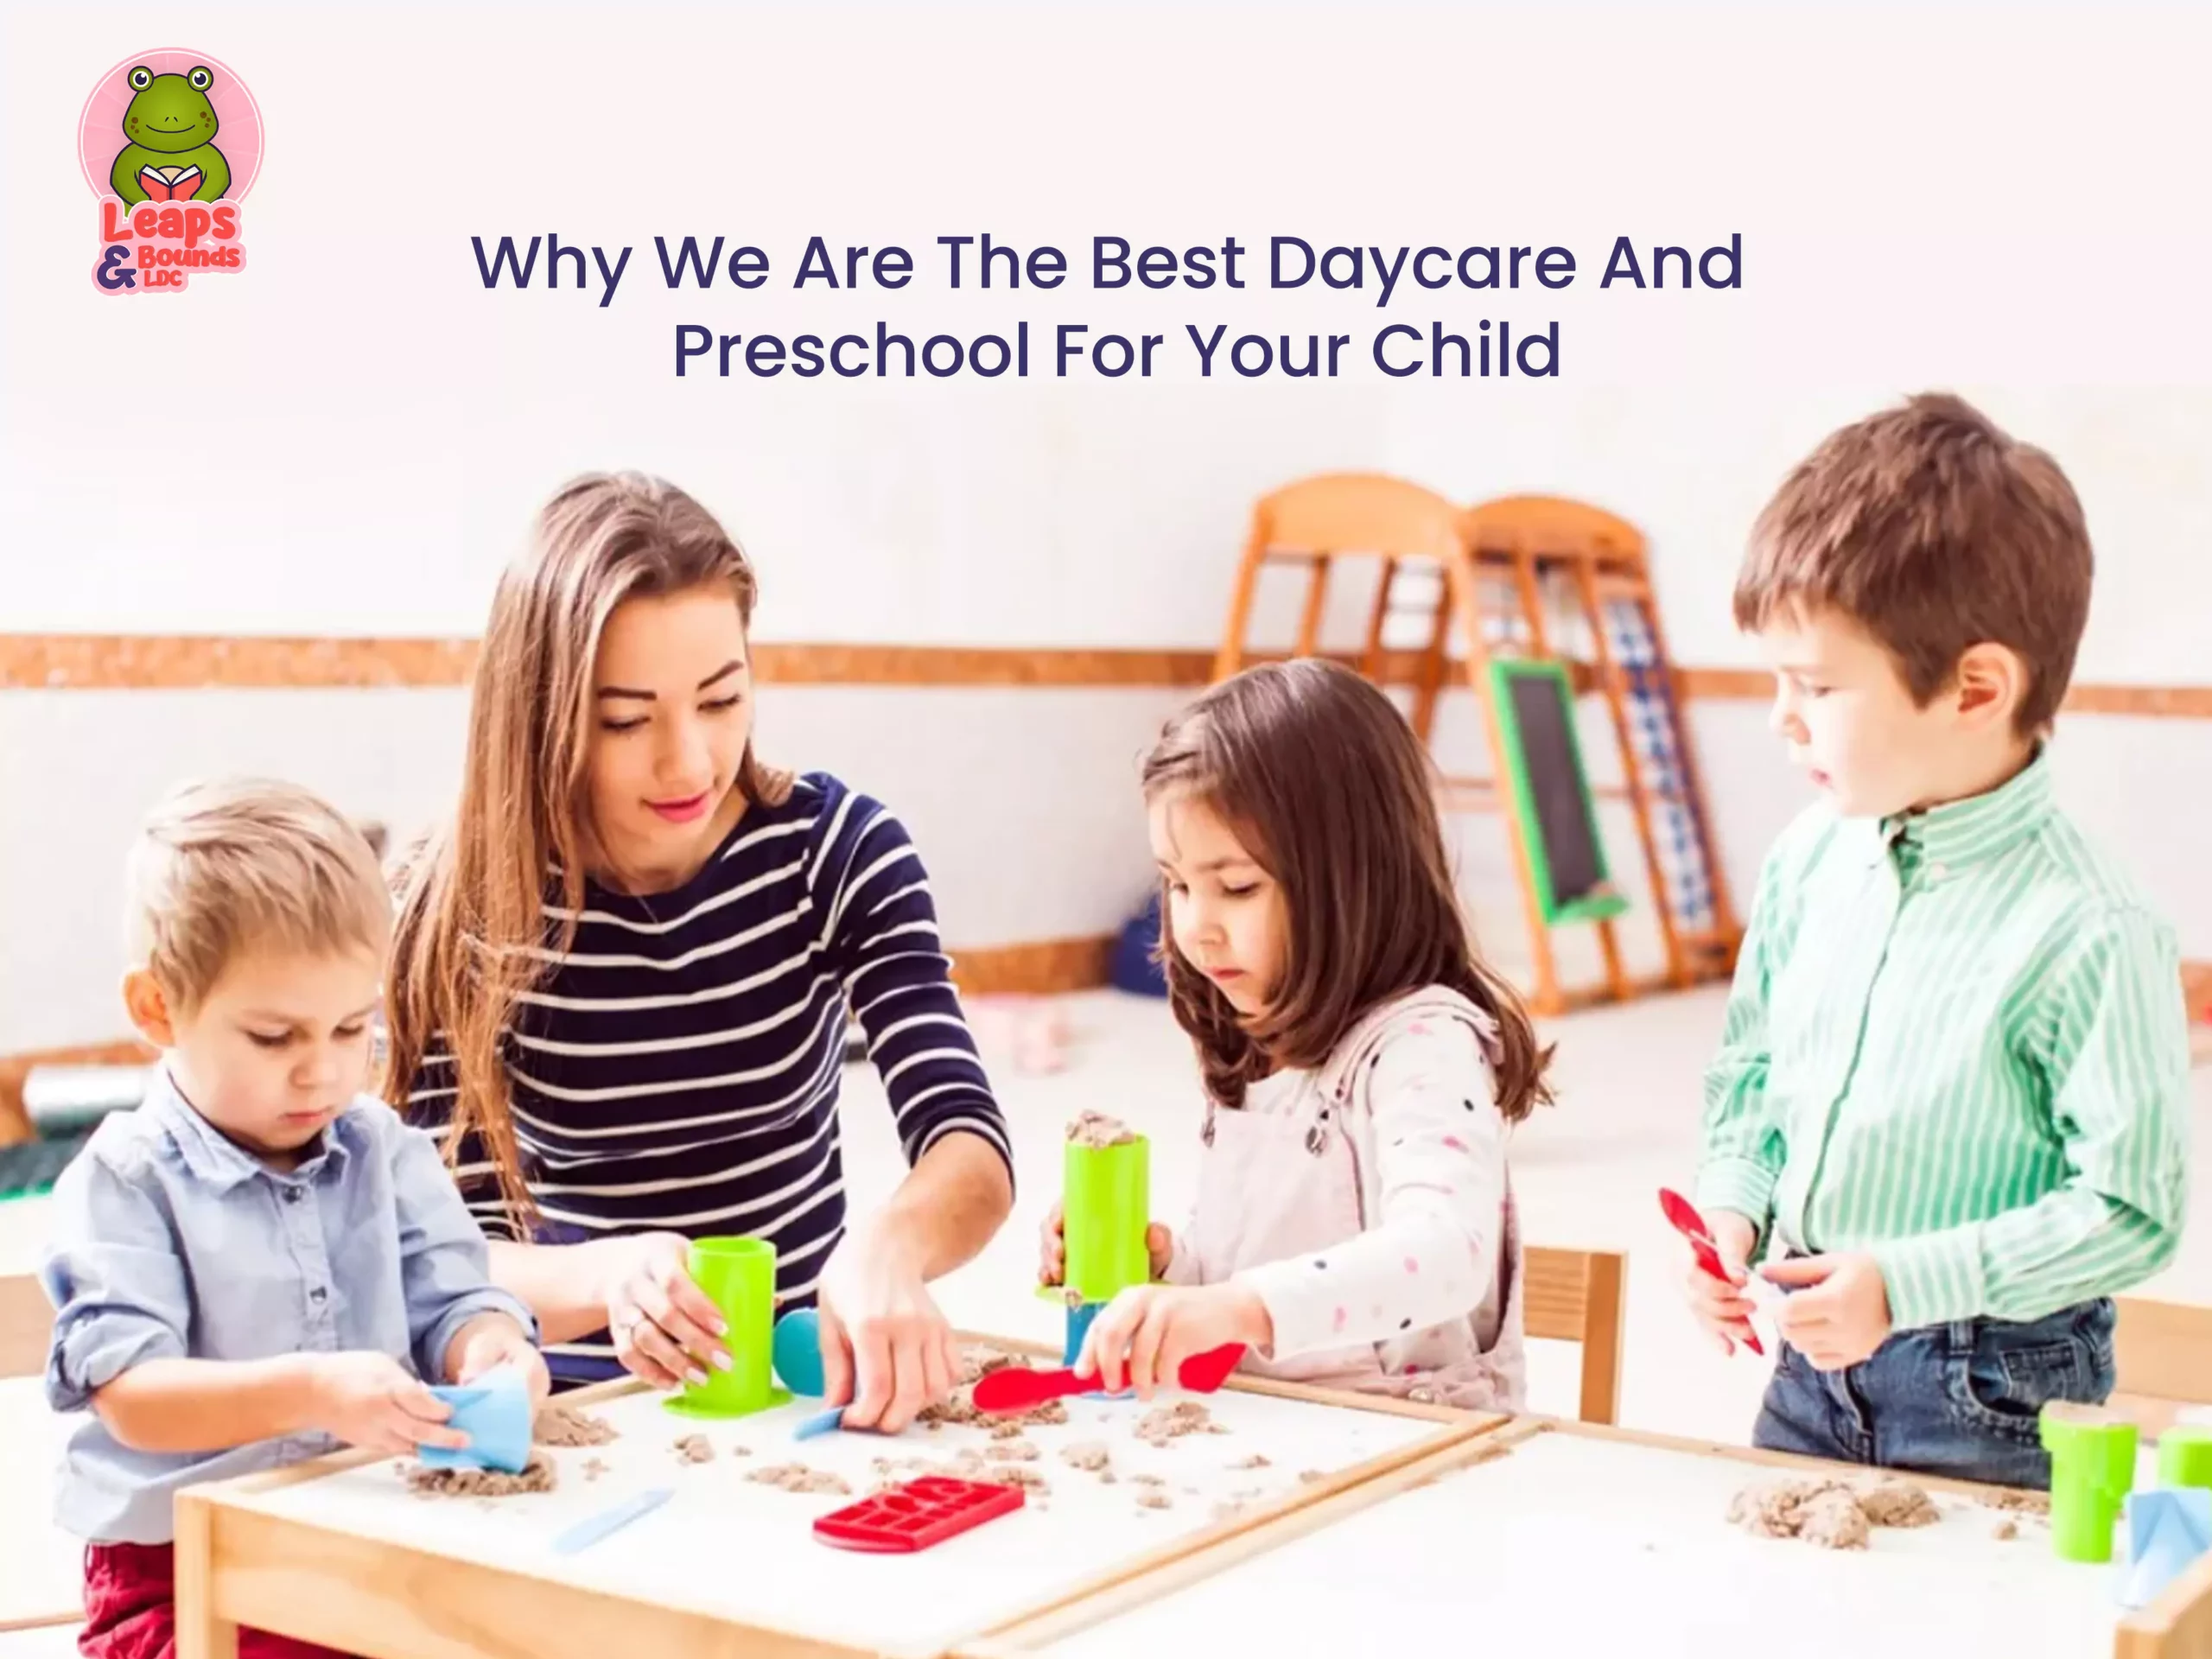 Why We Are The Best Daycare And Preschool For Your Child